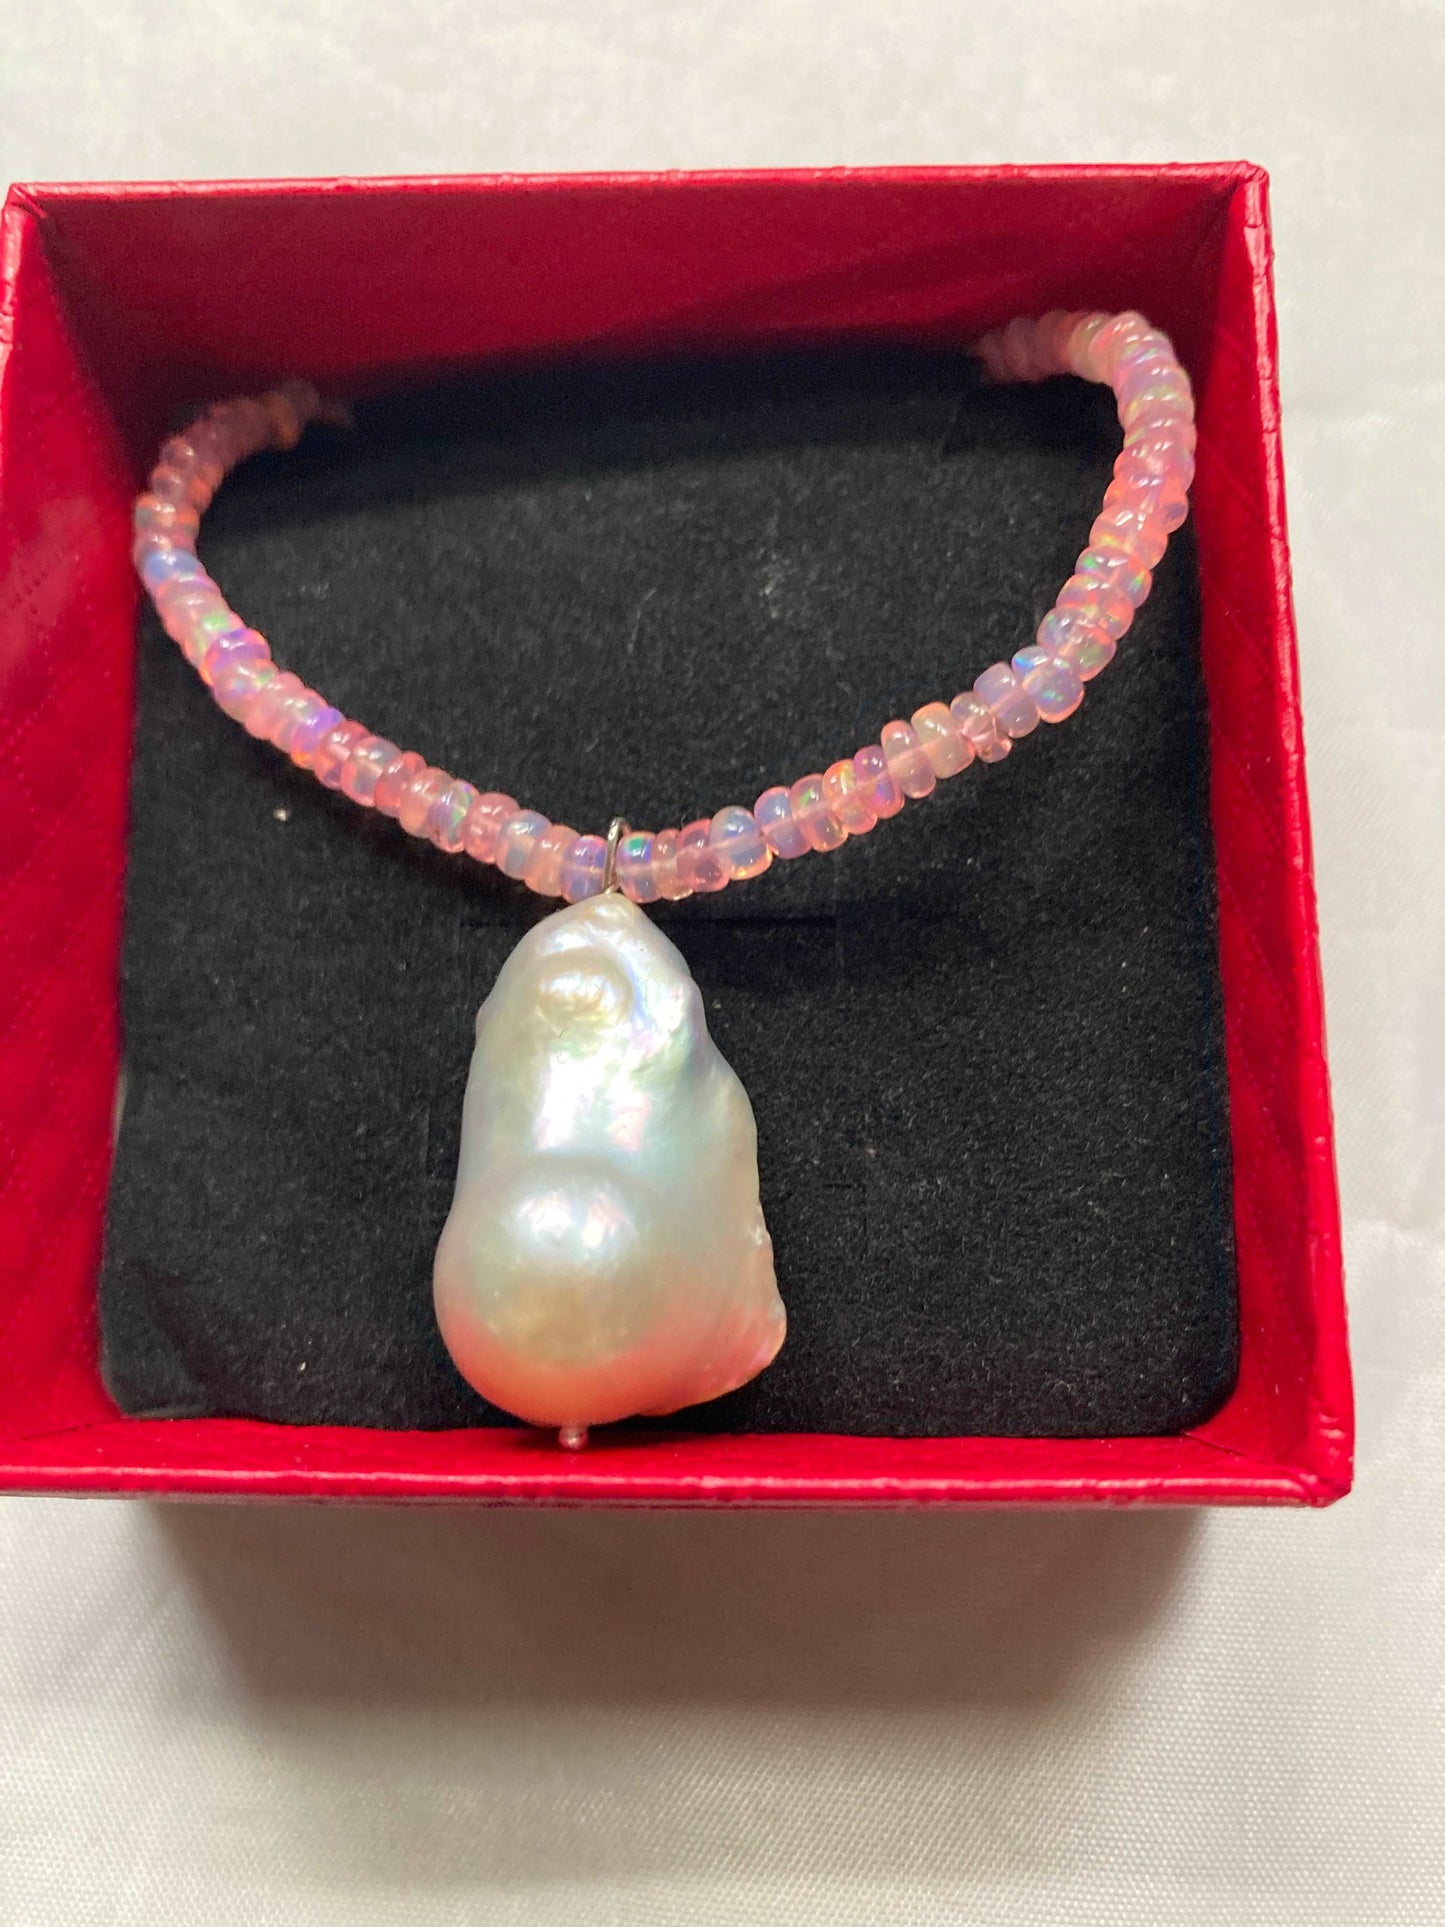 opal & pearl necklace in red box